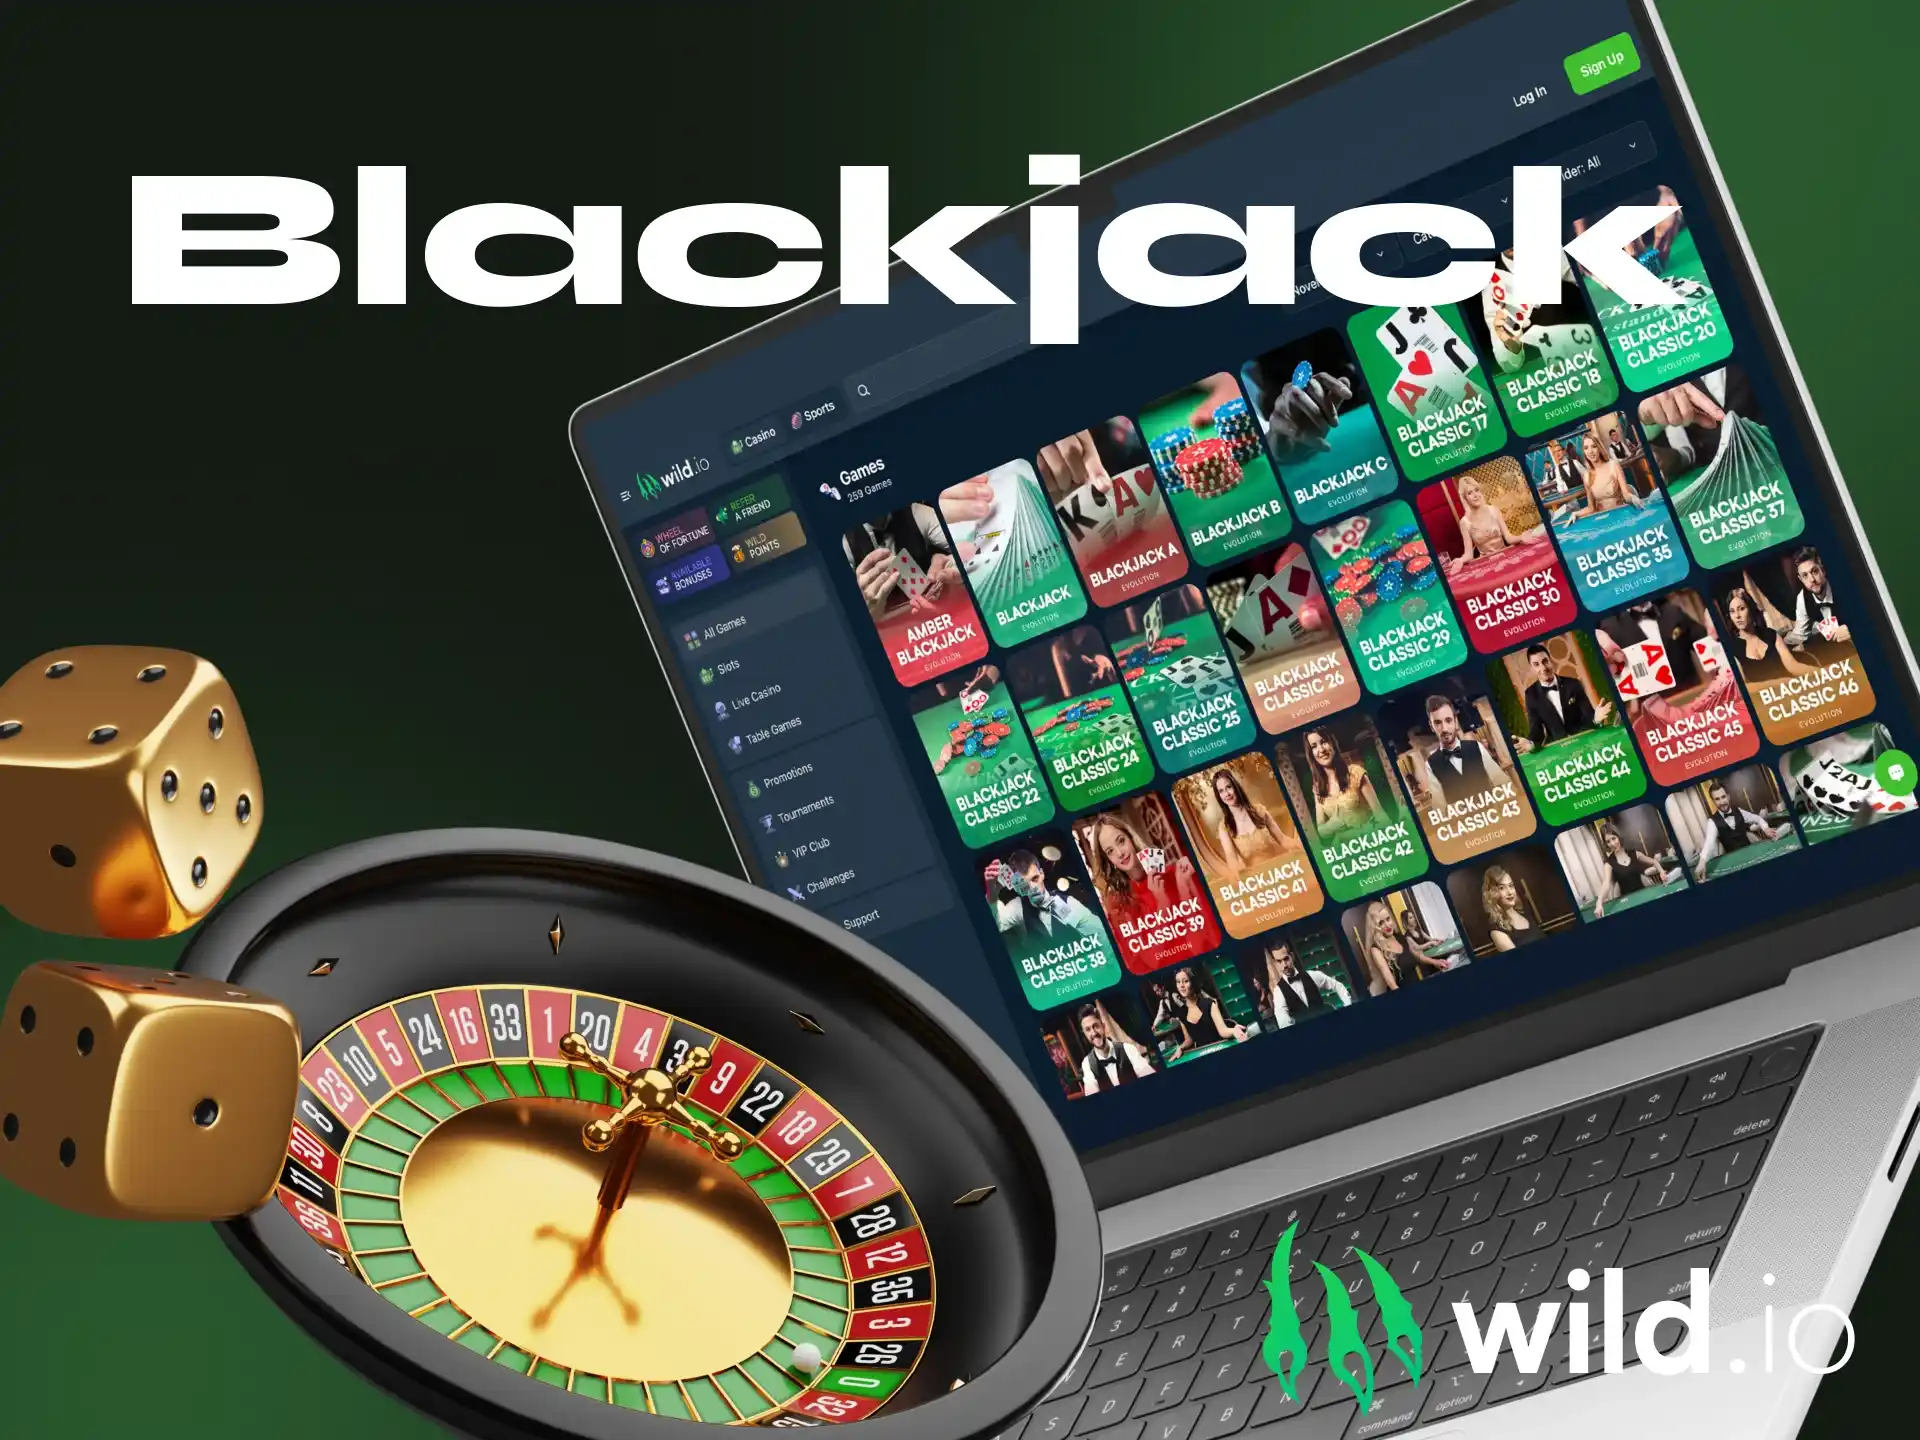 How many types of Blackjack games are there at Wildio online casino.